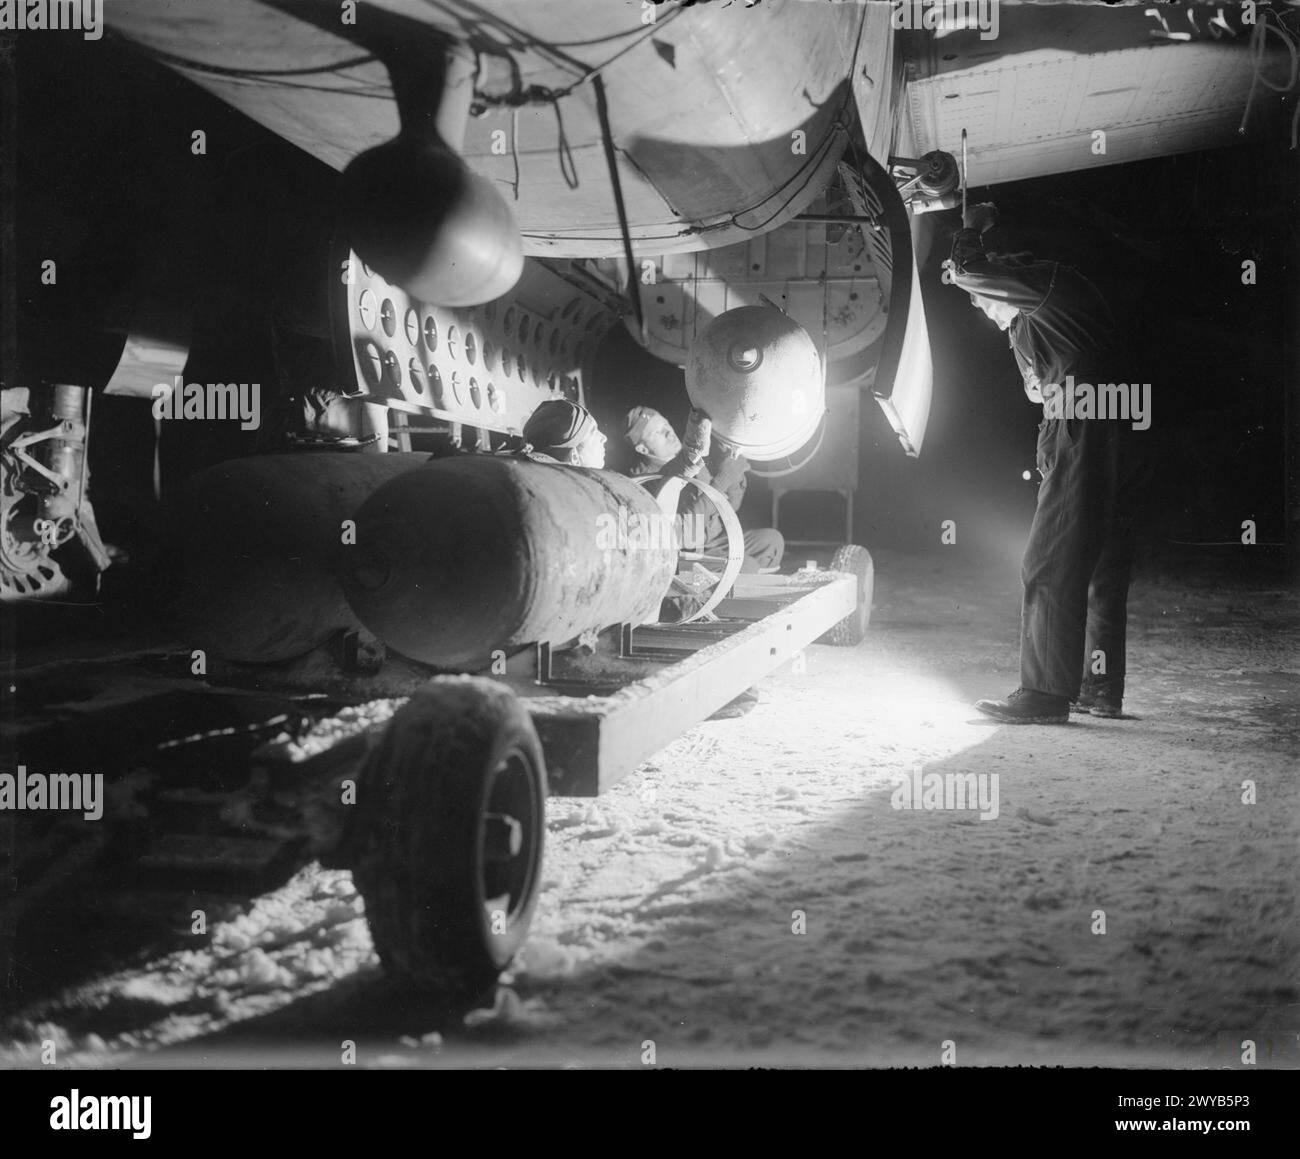 ROYAL AIR FORCE: 2ND TACTICAL AIR FORCE, 1943-1945. - In the bitter cold and snow of a January night, armourers load four 1,000-lb MC bombs into the bomb-bay of a North American Mitchell of No. 139 Wing, No. 2 Group, for an early morning sortie from B58/ Melsbroek, Belgium. , Royal Air Force, 2 Group, Royal Air Force, Maintenance Unit, 201 Stock Photo